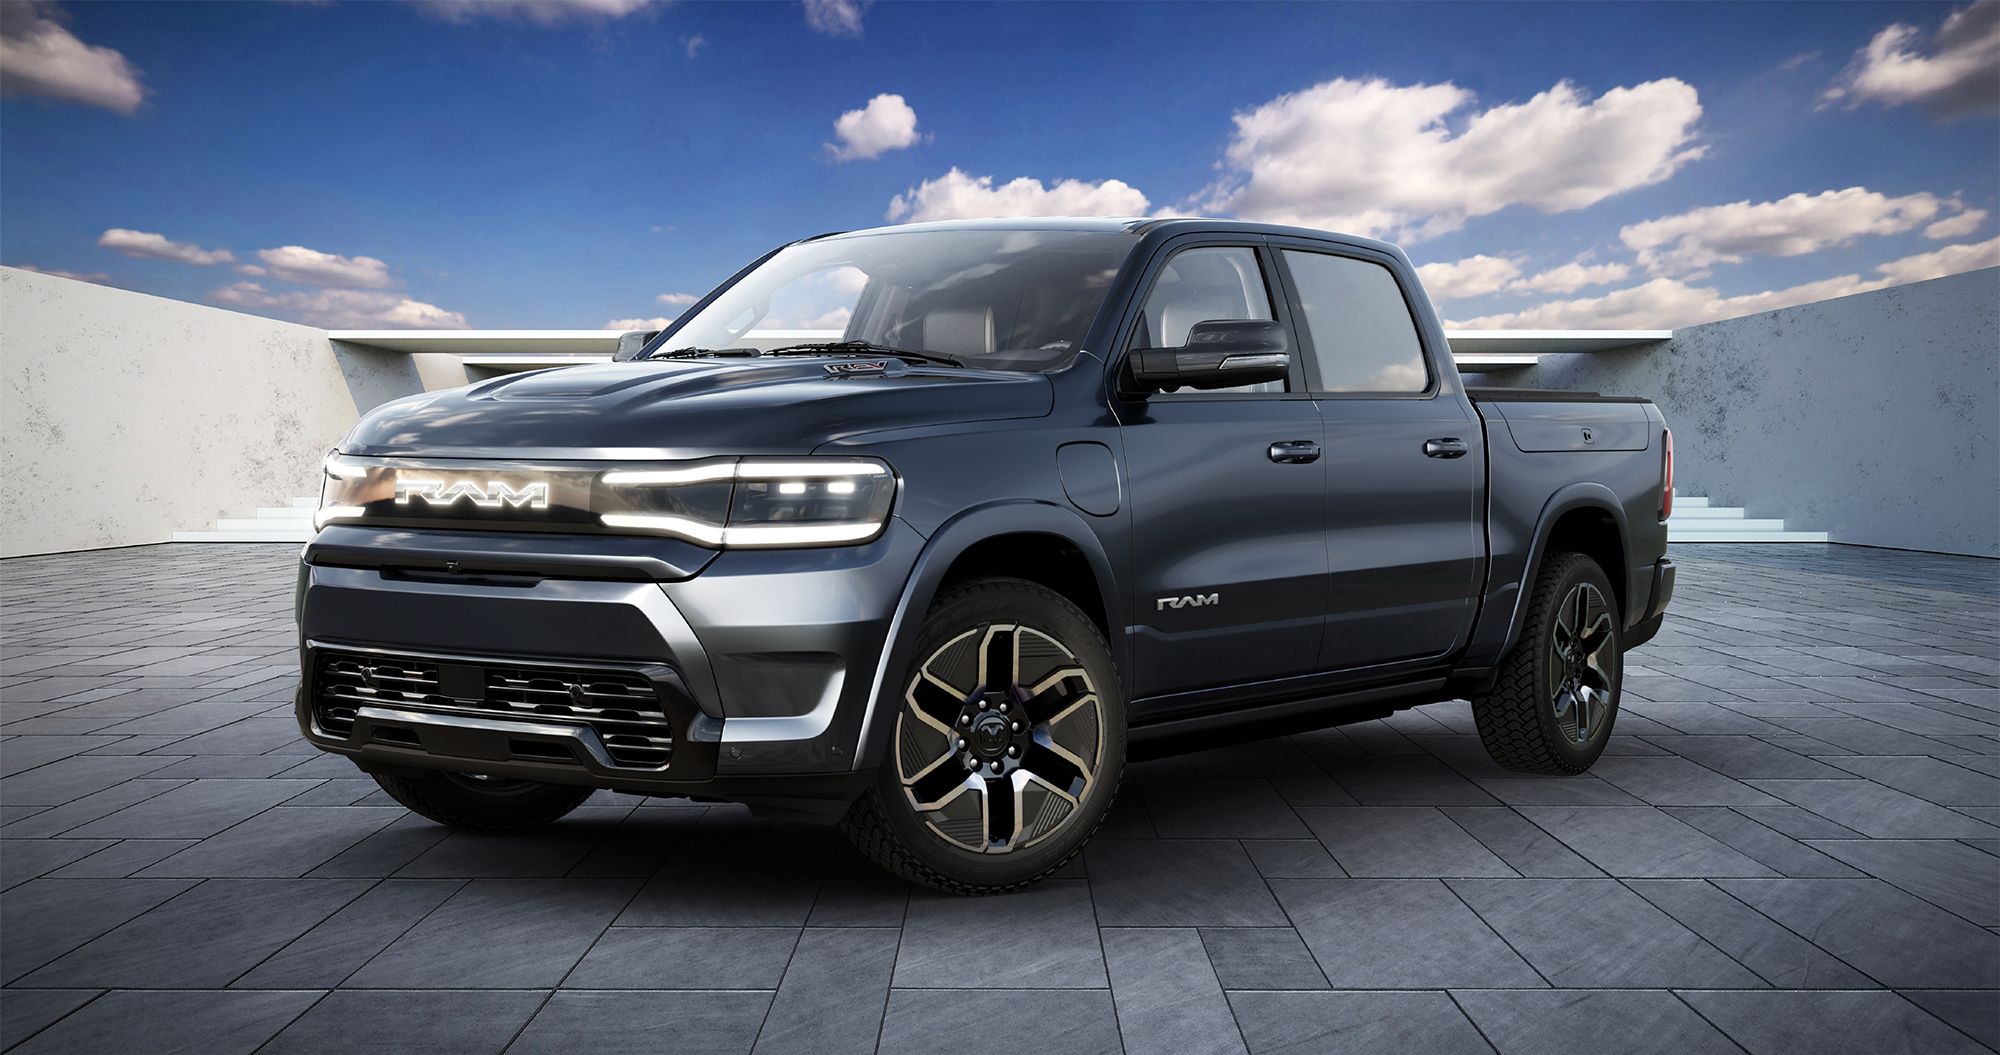 Ram electric pickup truck can go 500 miles on a charge, says